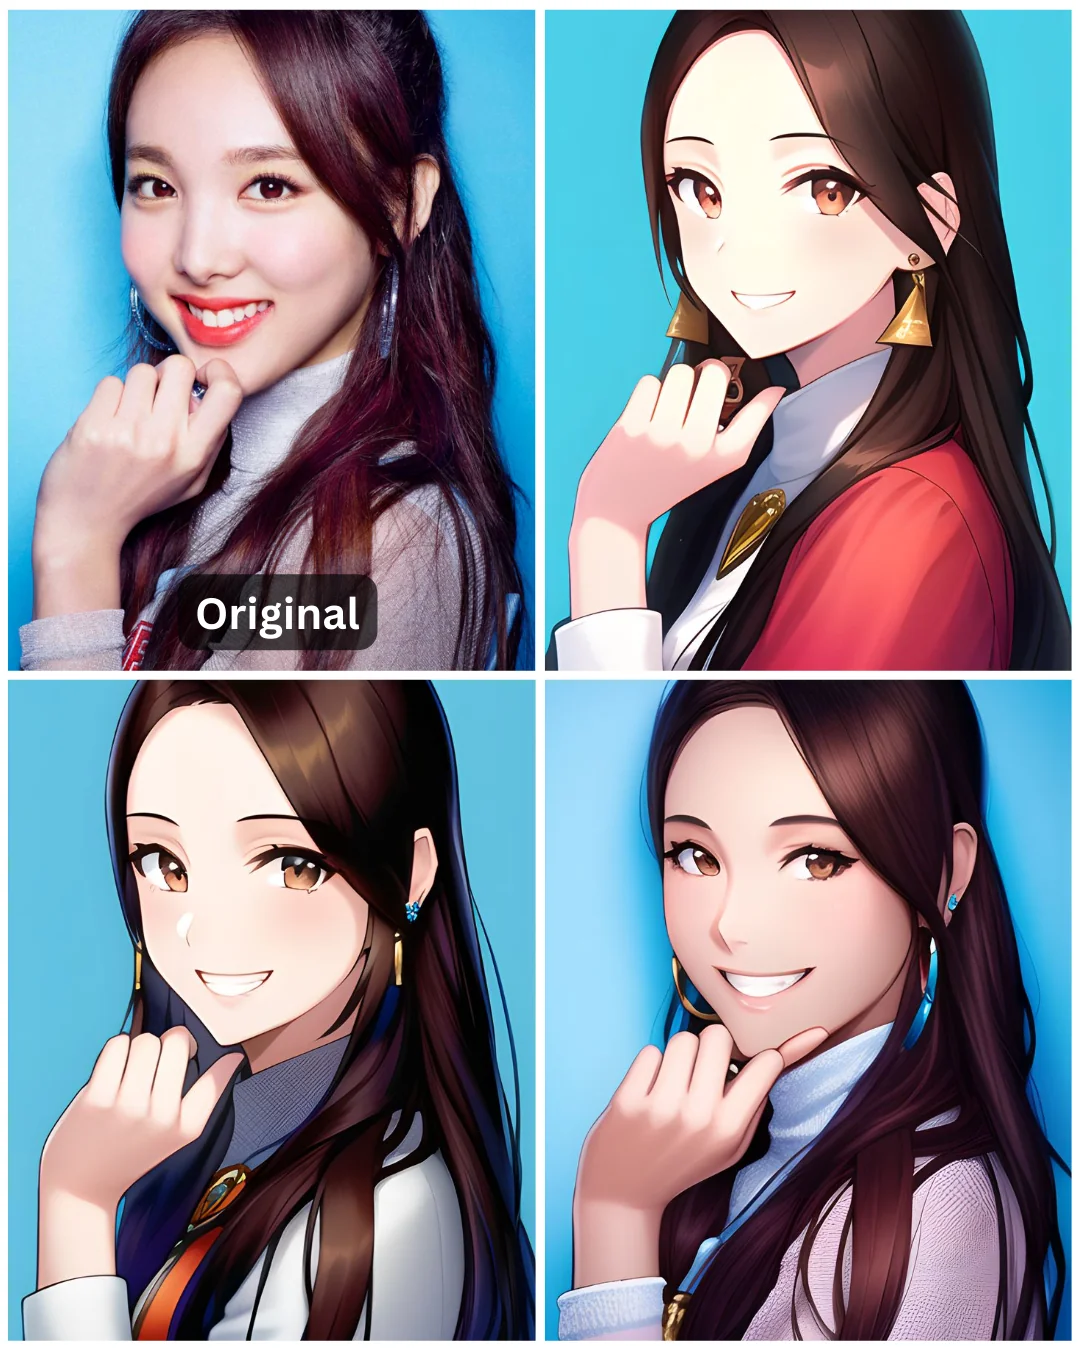 Top 6 Tools to Turn Your Photo into Anime Online: A Review